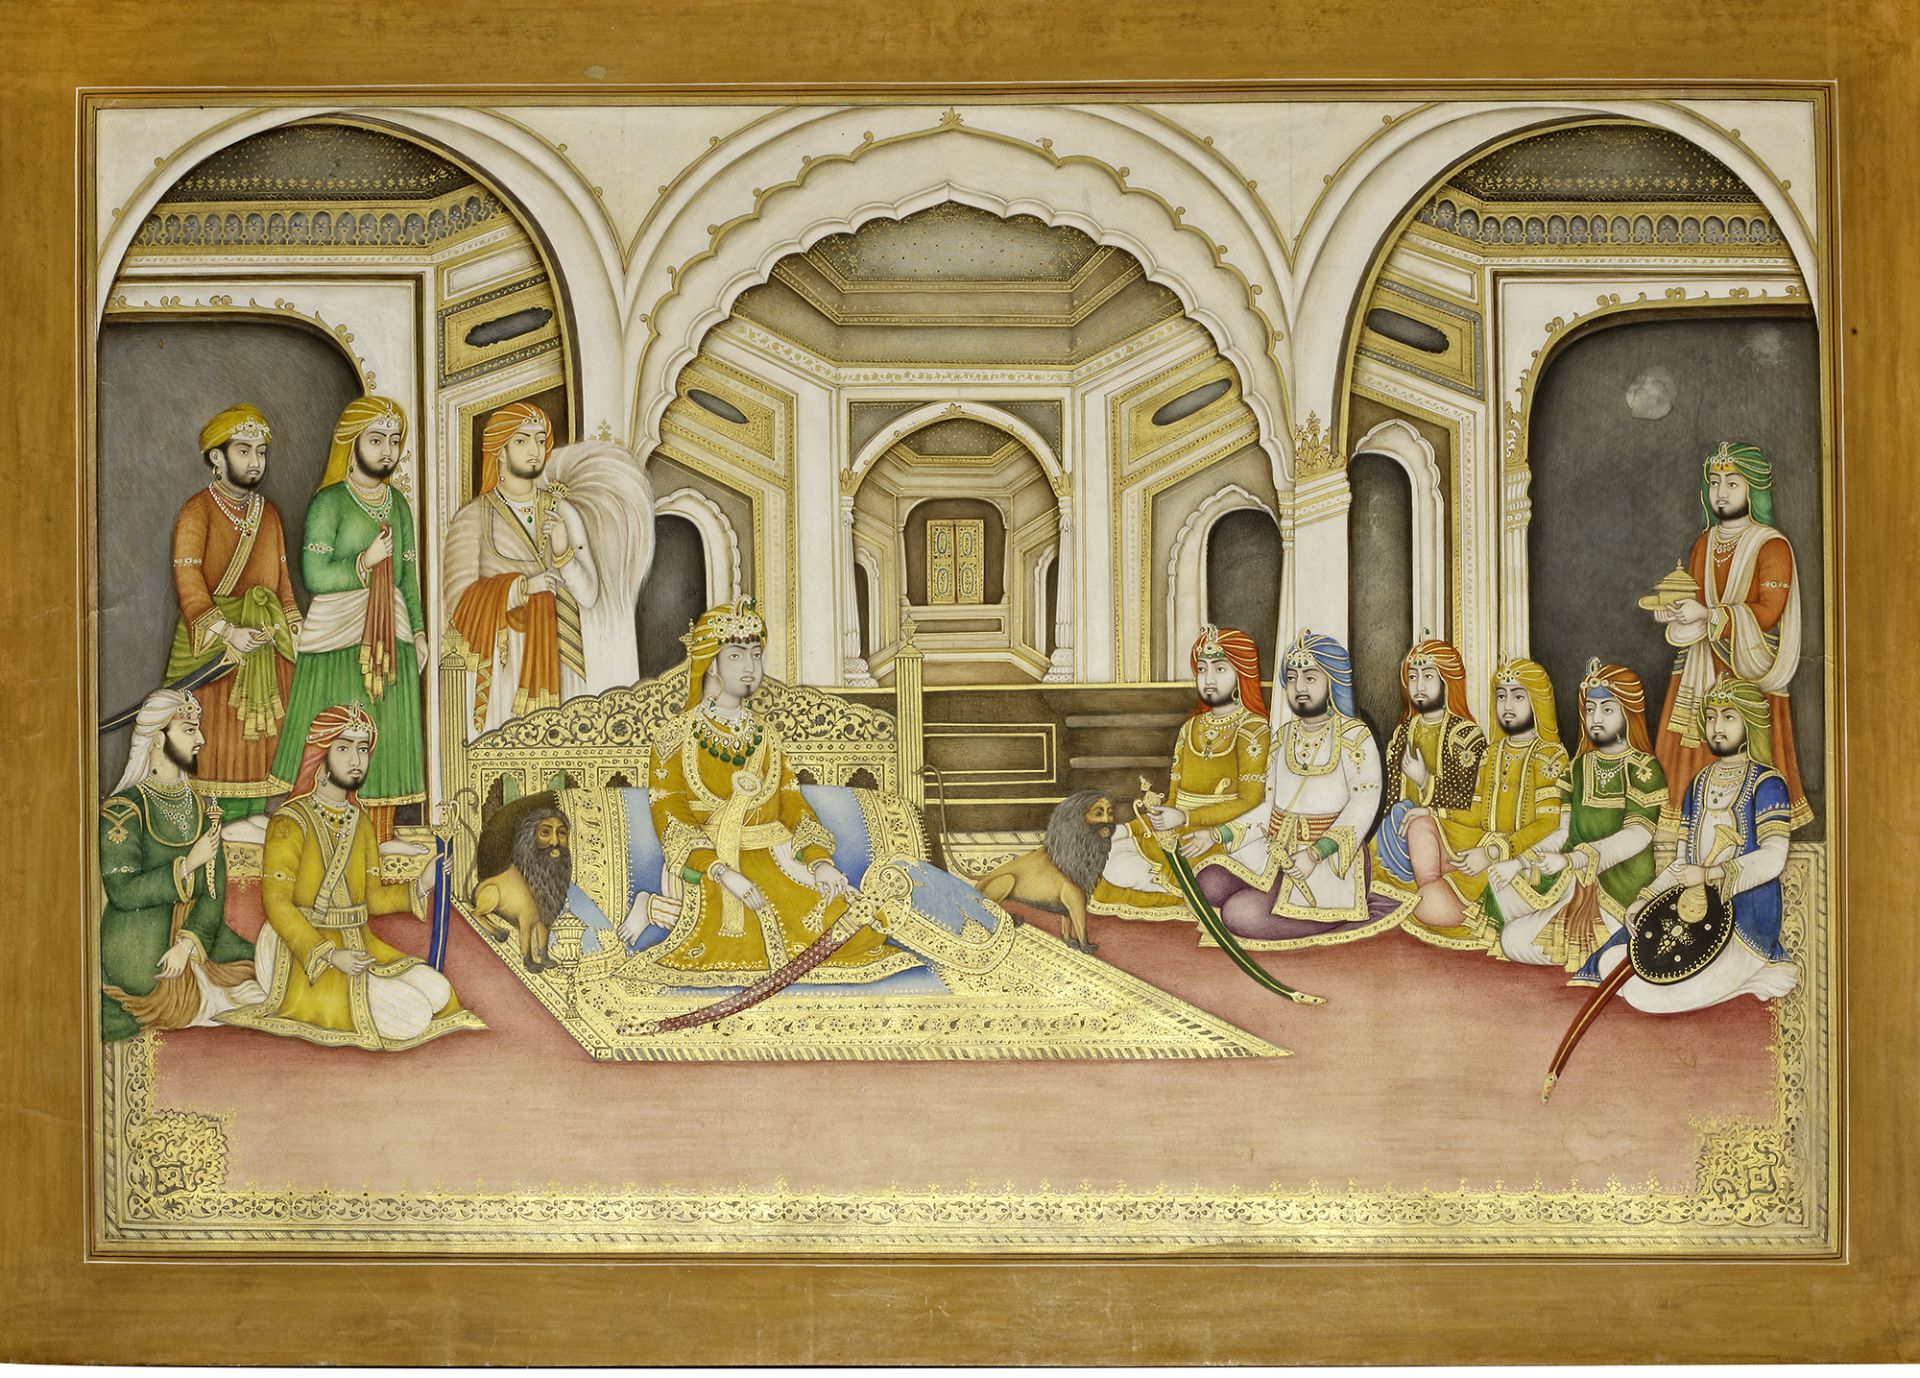 DURBAR OF BHARPUR SINGH, RAJAH OF NABHA (R. 1847-63), ENTHRONED WITH ATTENDANTS AFTER THE UMBALLA DU